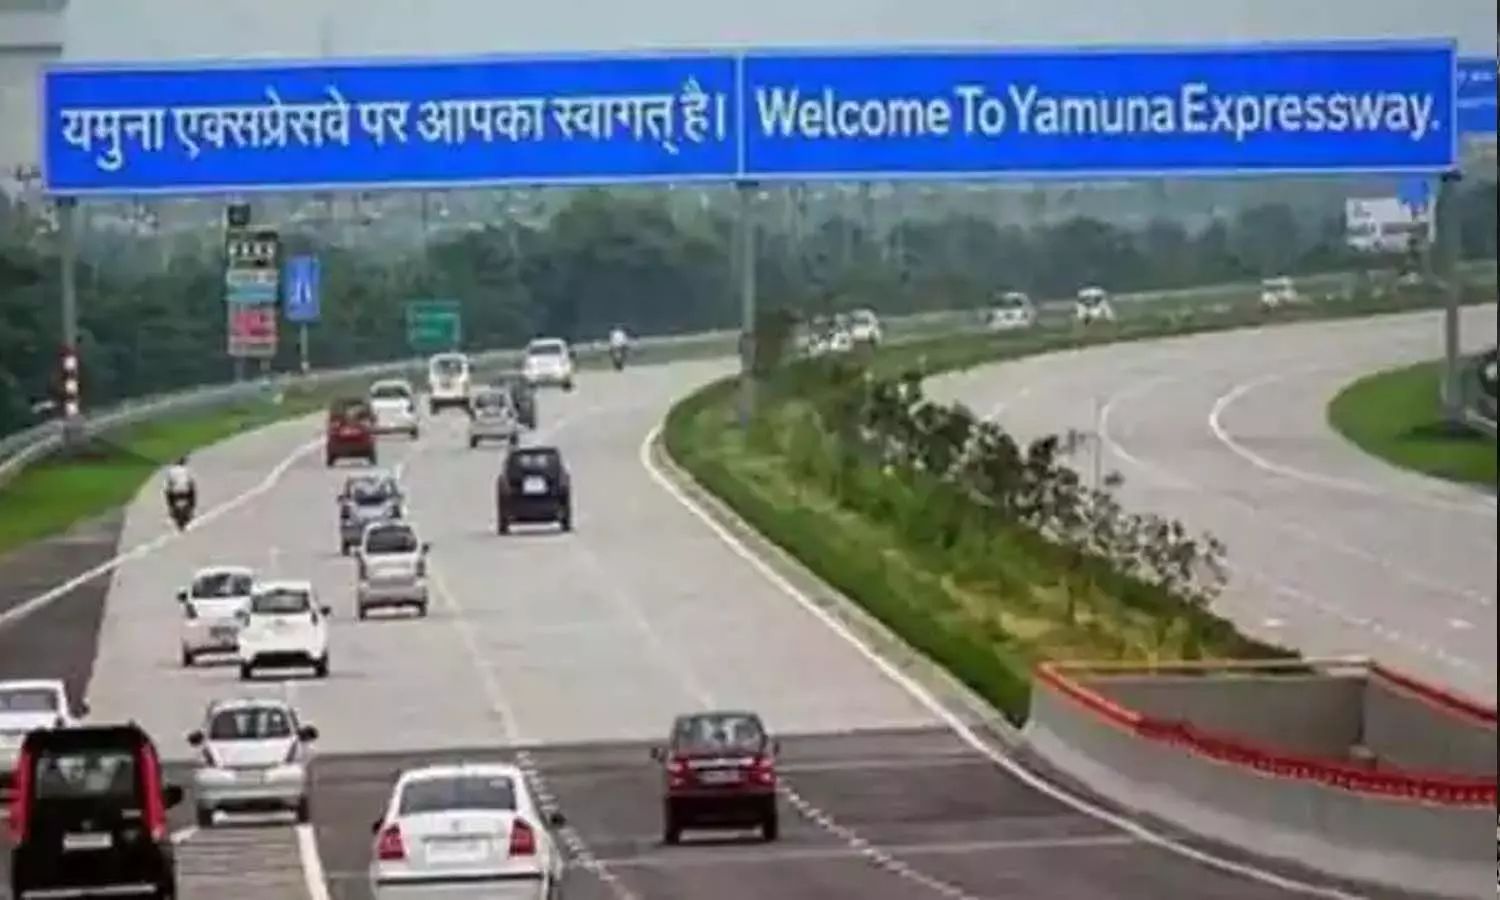 Speed limit will be reduced on Yamuna Expressway from December 15, decision taken due to fog